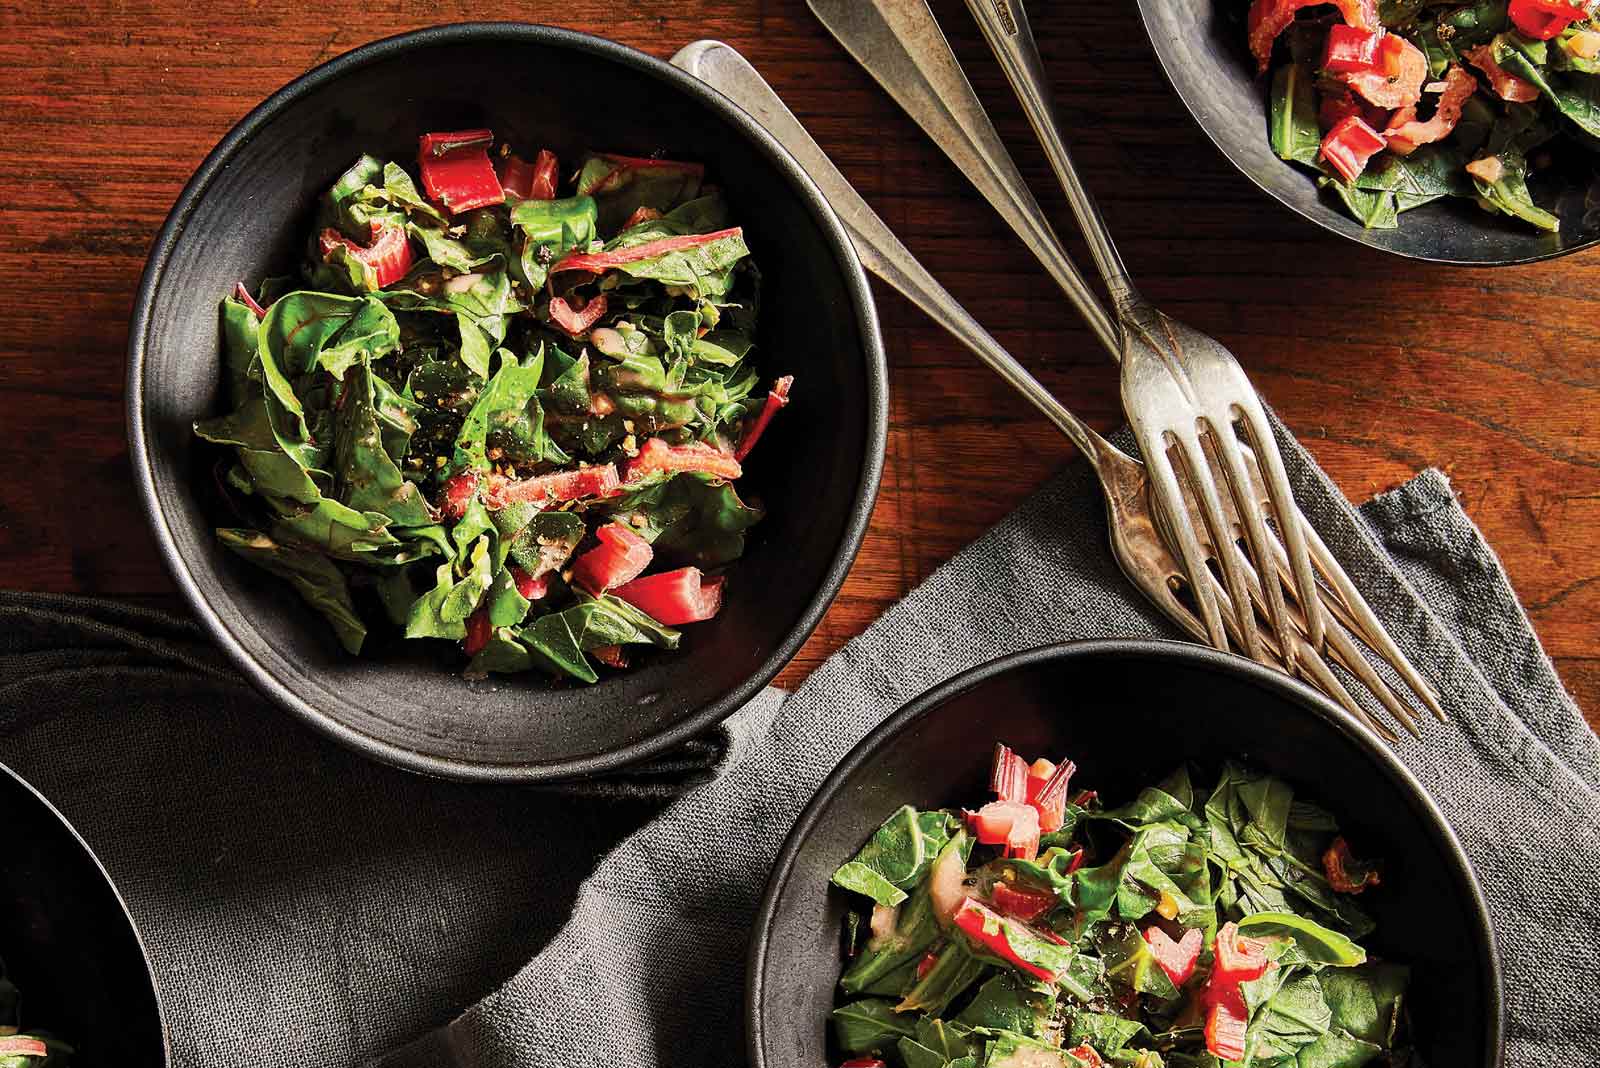 Ethiopian Collard Greens and Chard in gray bowls against a dark wood tabletop